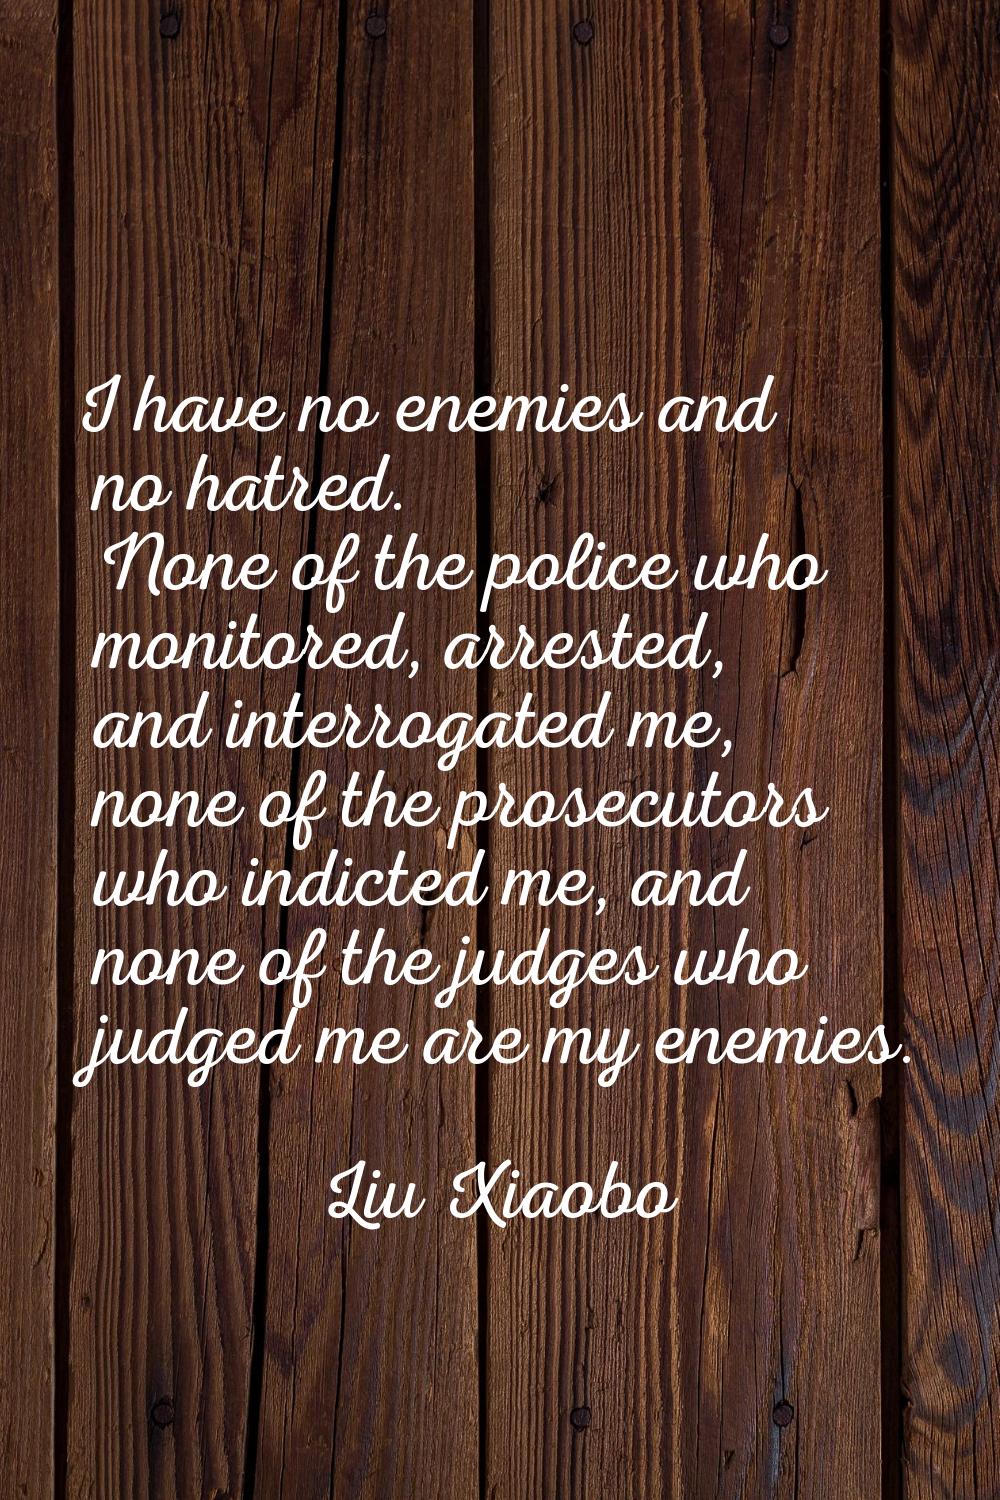 I have no enemies and no hatred. None of the police who monitored, arrested, and interrogated me, n